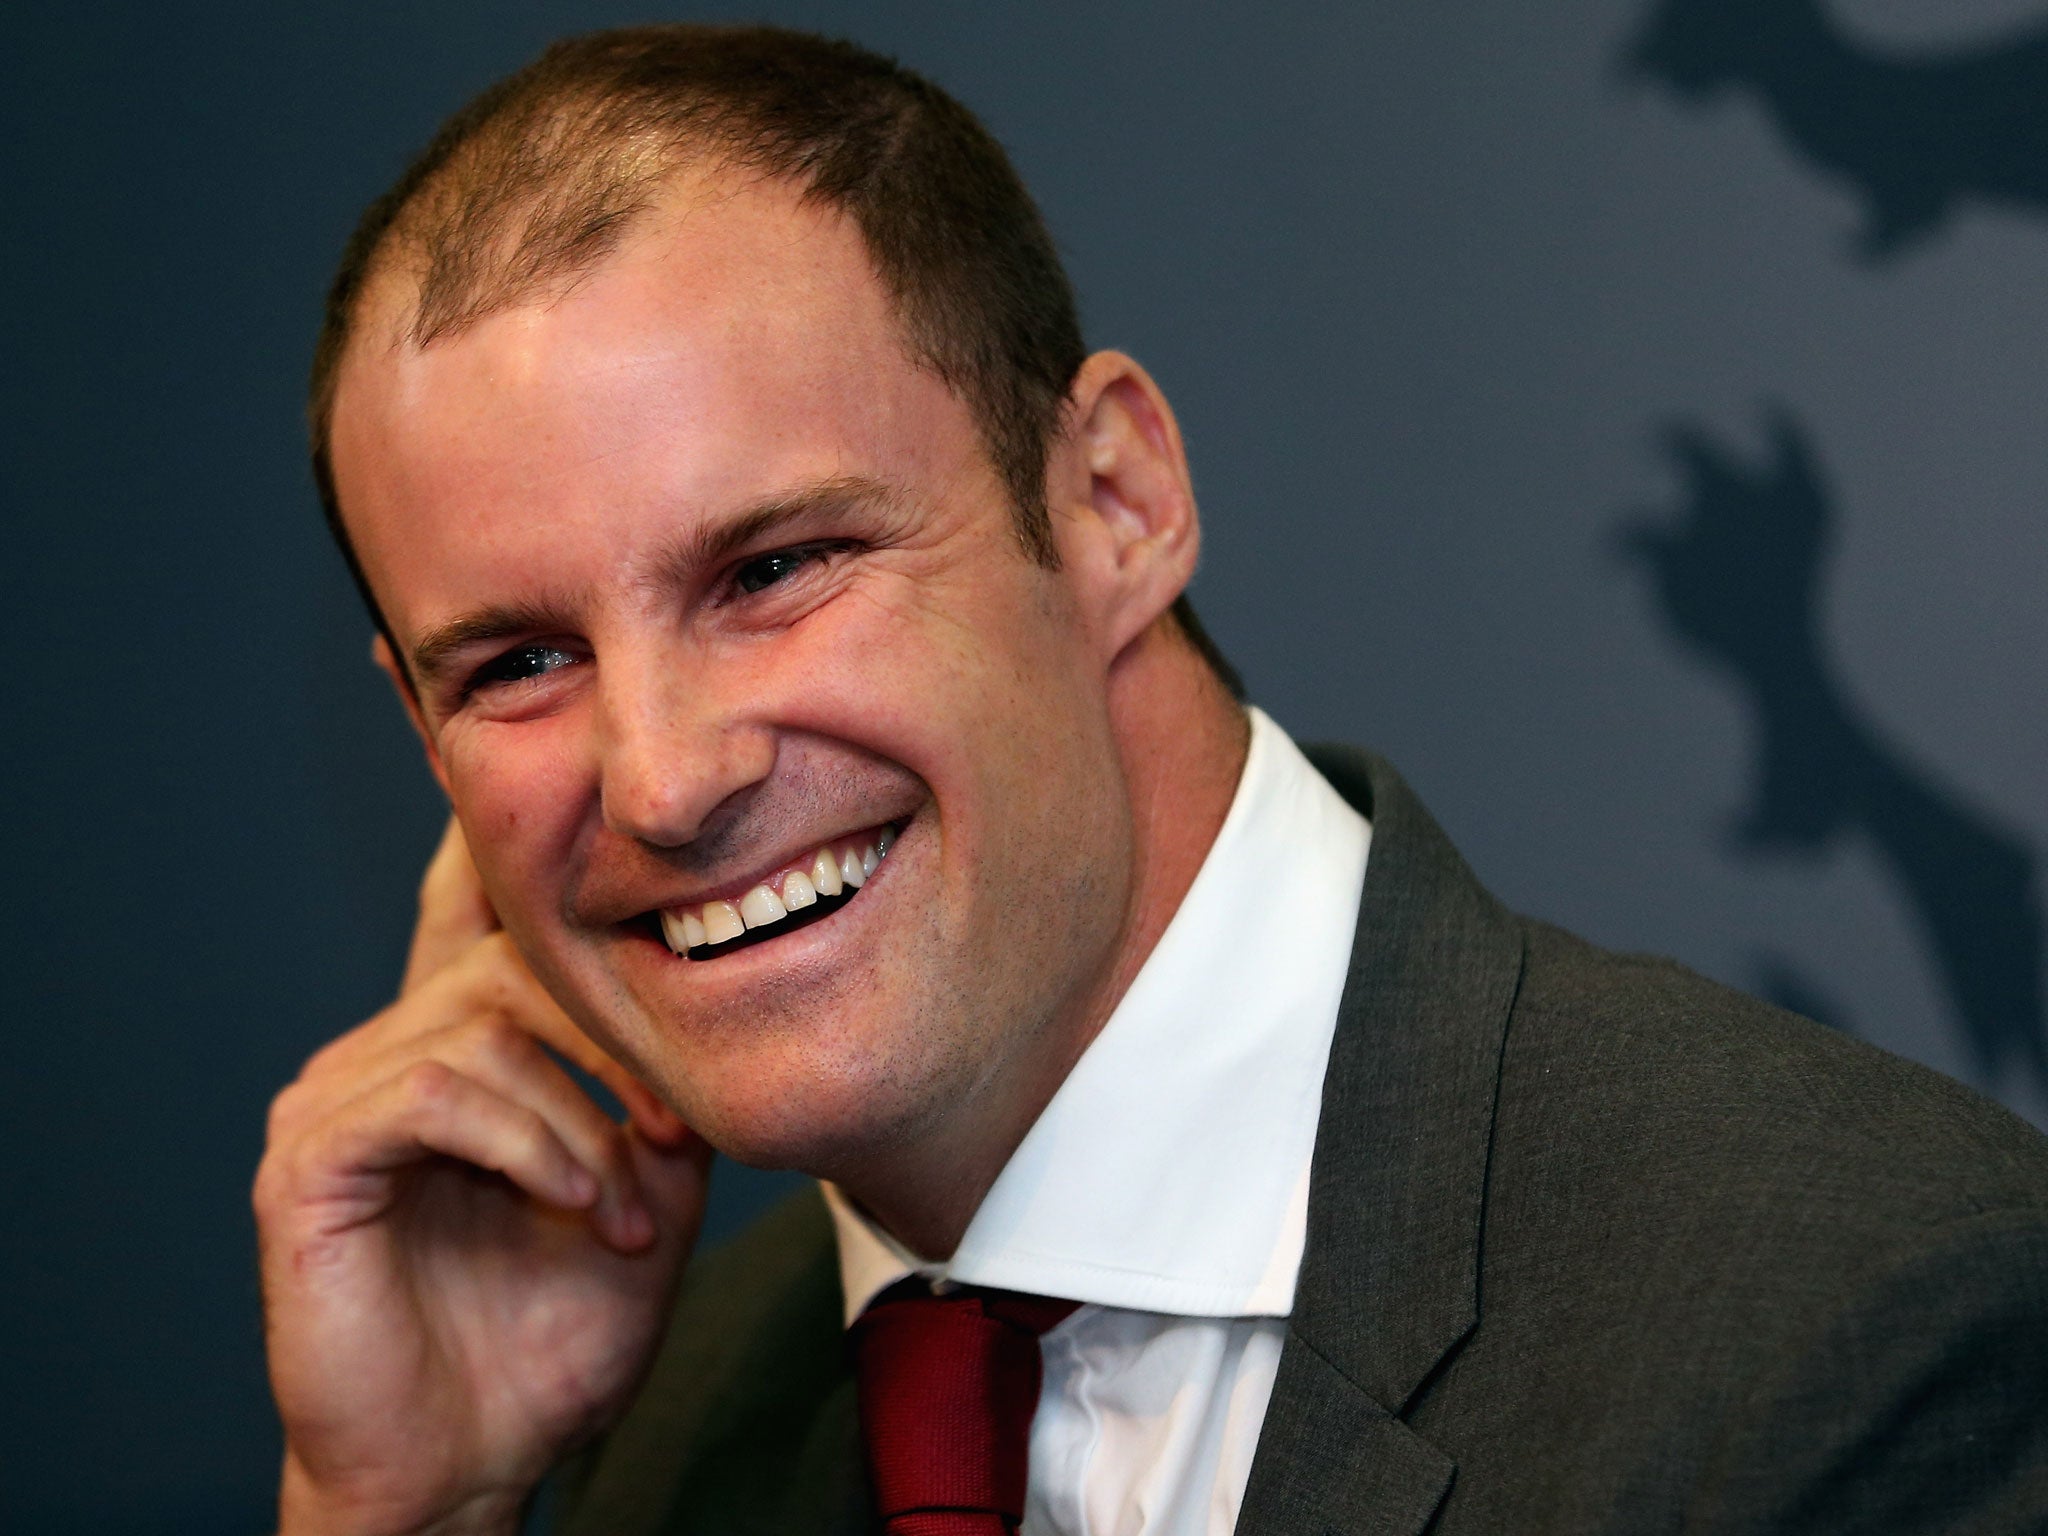 Andrew Strauss of England enjoys a joke as he announces his retirement from professional cricket